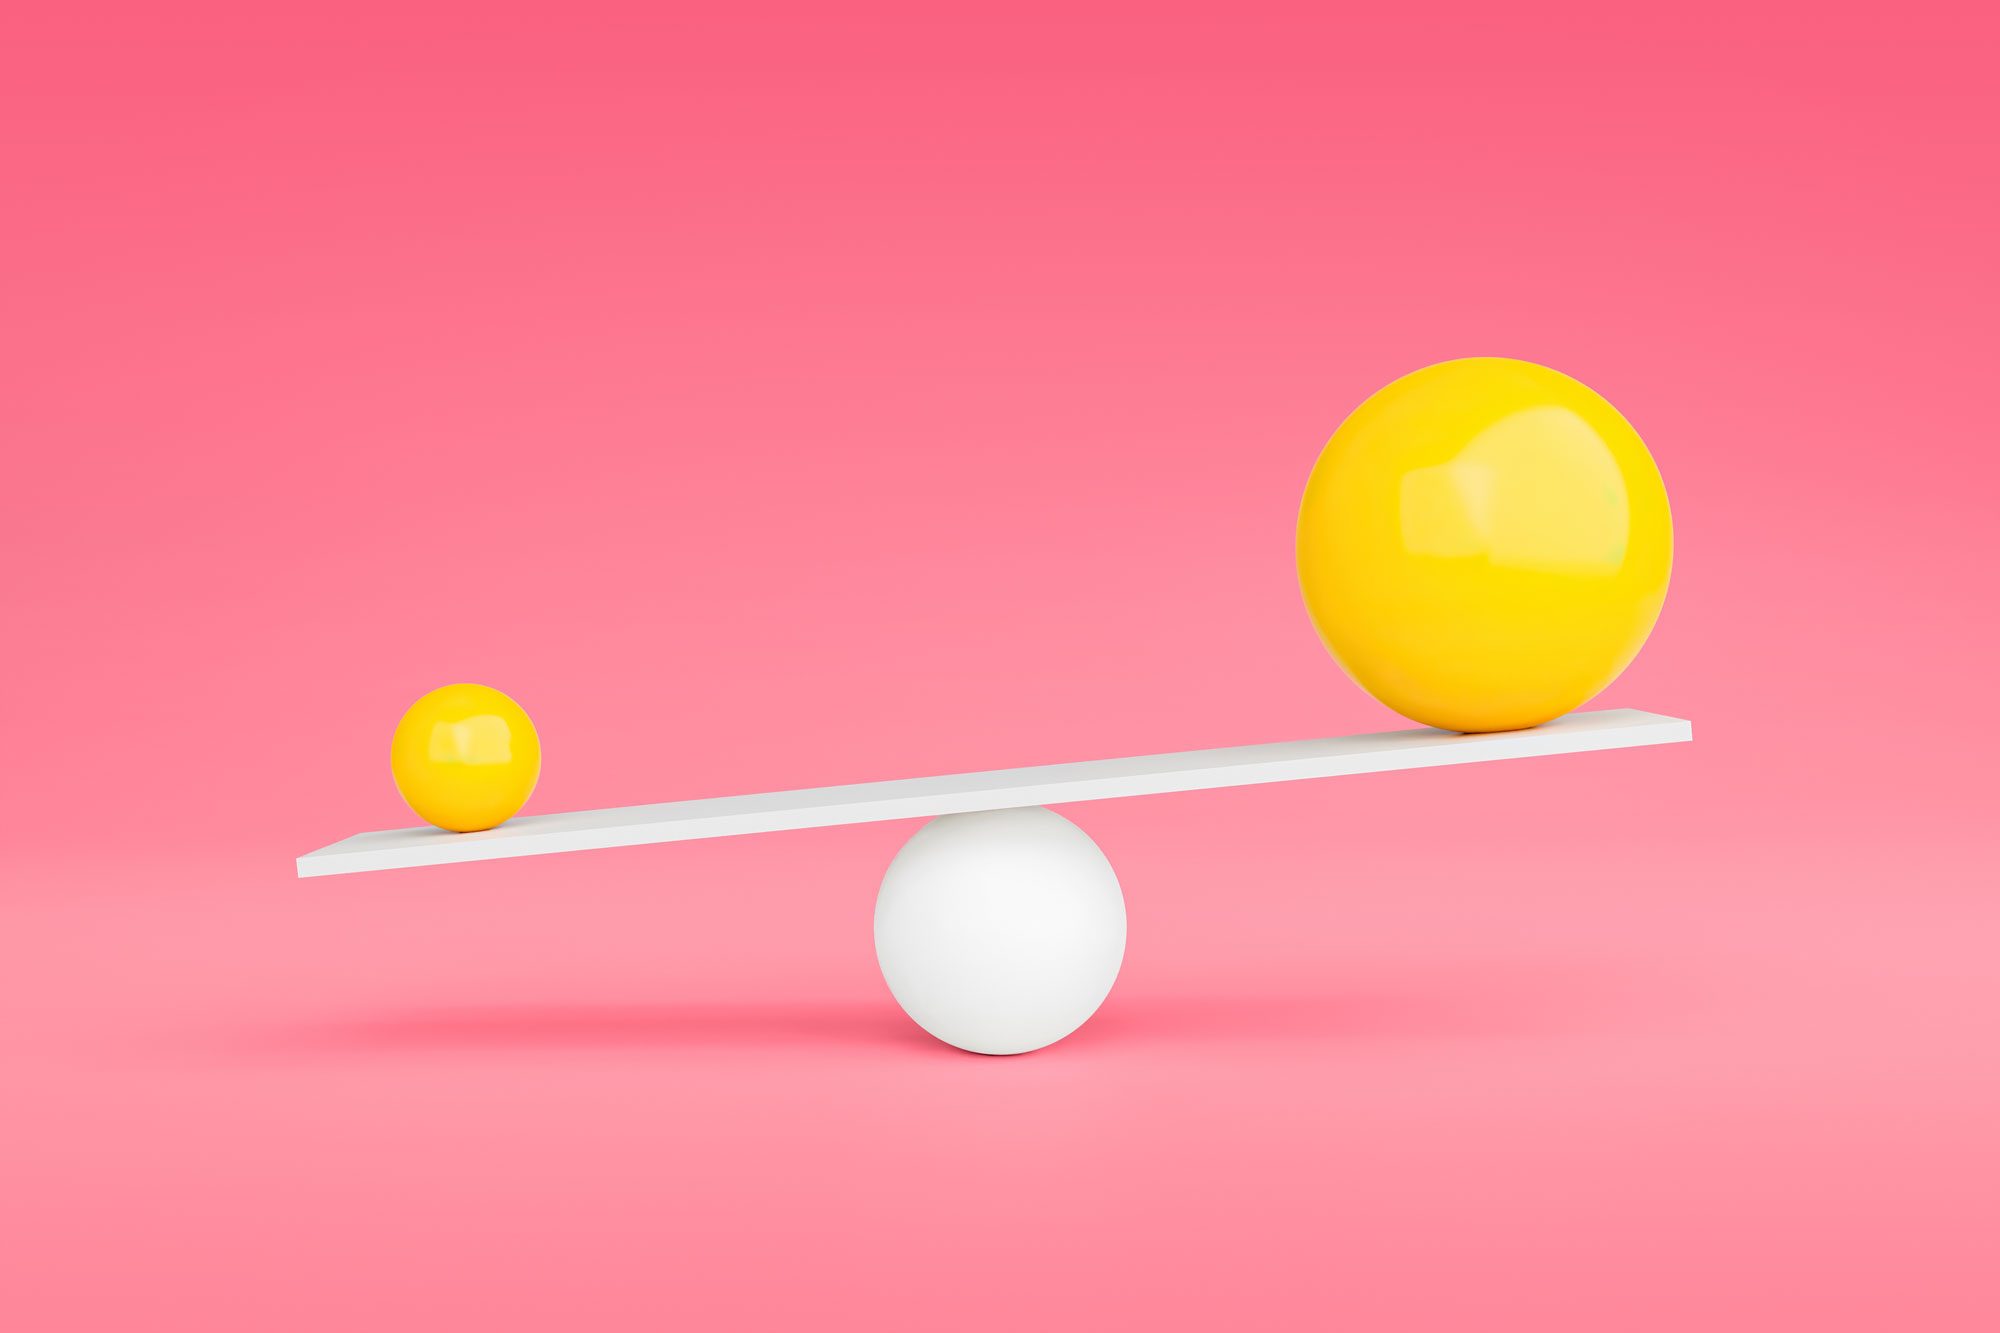 two yellow spheres on either end of a balance on pink background; the smaller ball is the heavier ball